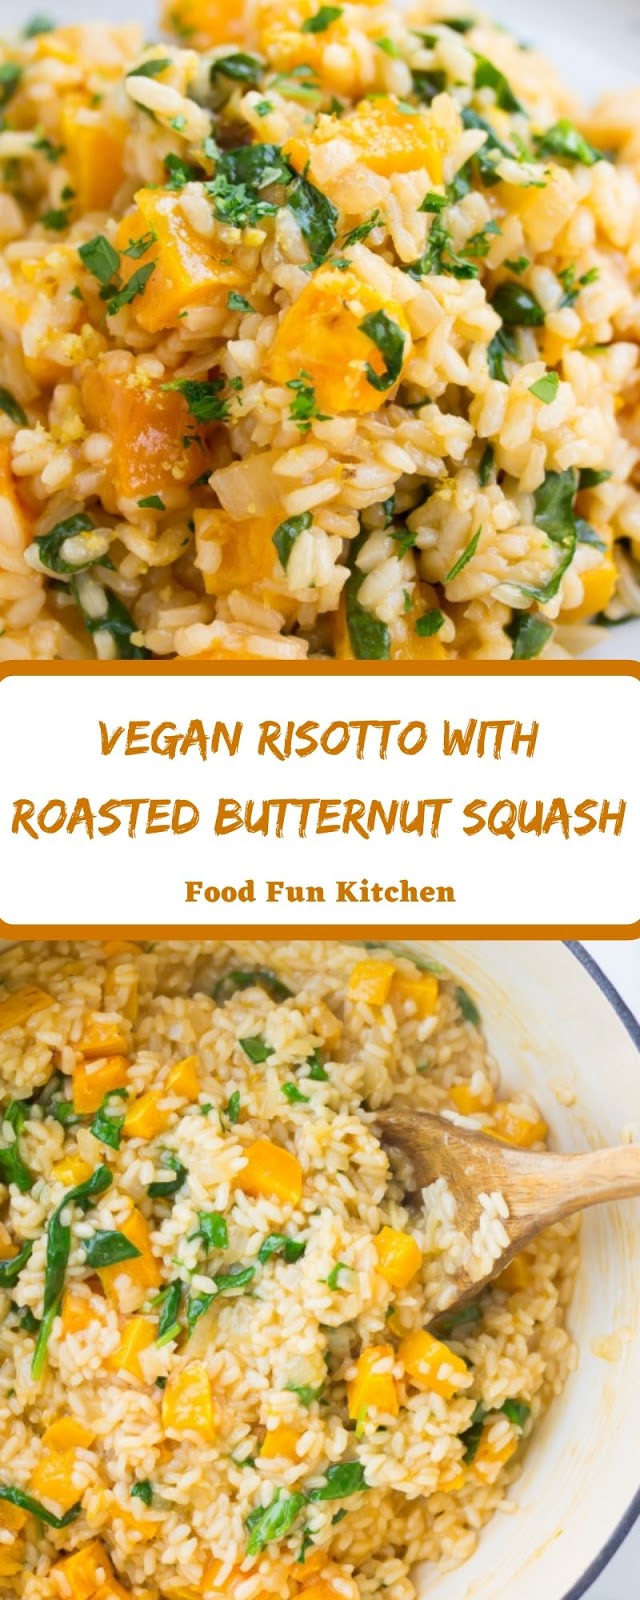 VEGAN RISOTTO WITH ROASTED BUTTERNUT SQUASH